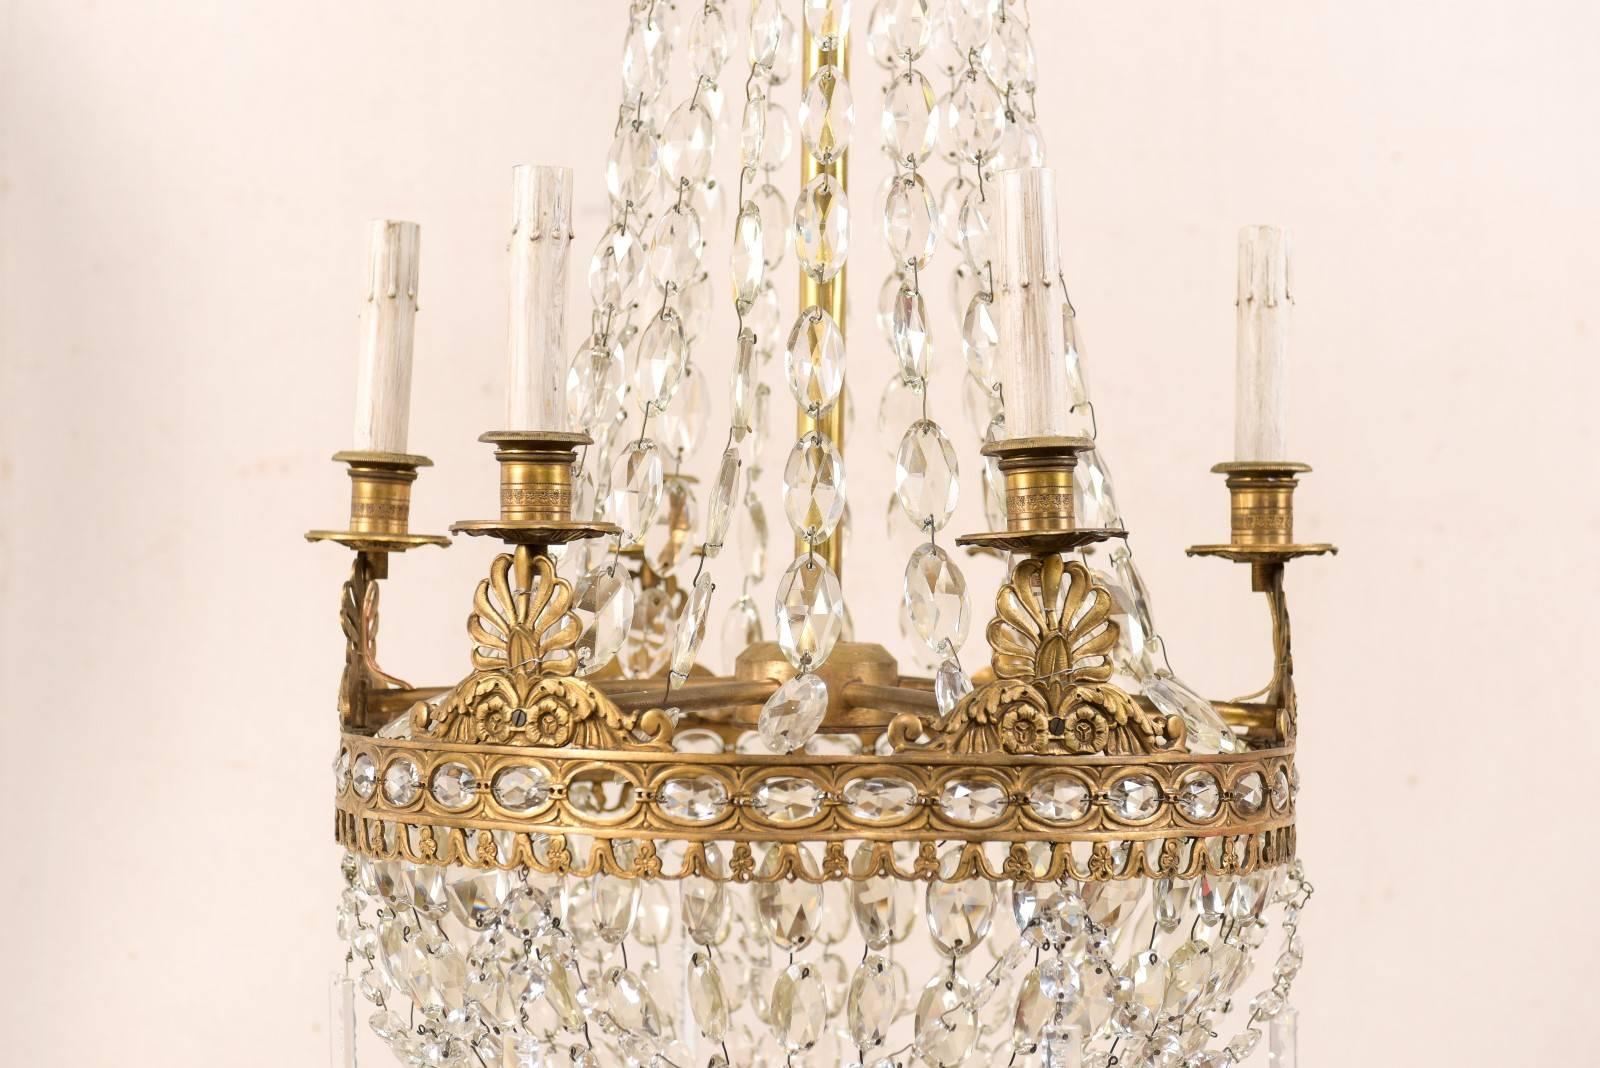 20th Century An Exquisite Italian Mid-century Basket-Shaped Crystal and Brass Chandelier For Sale